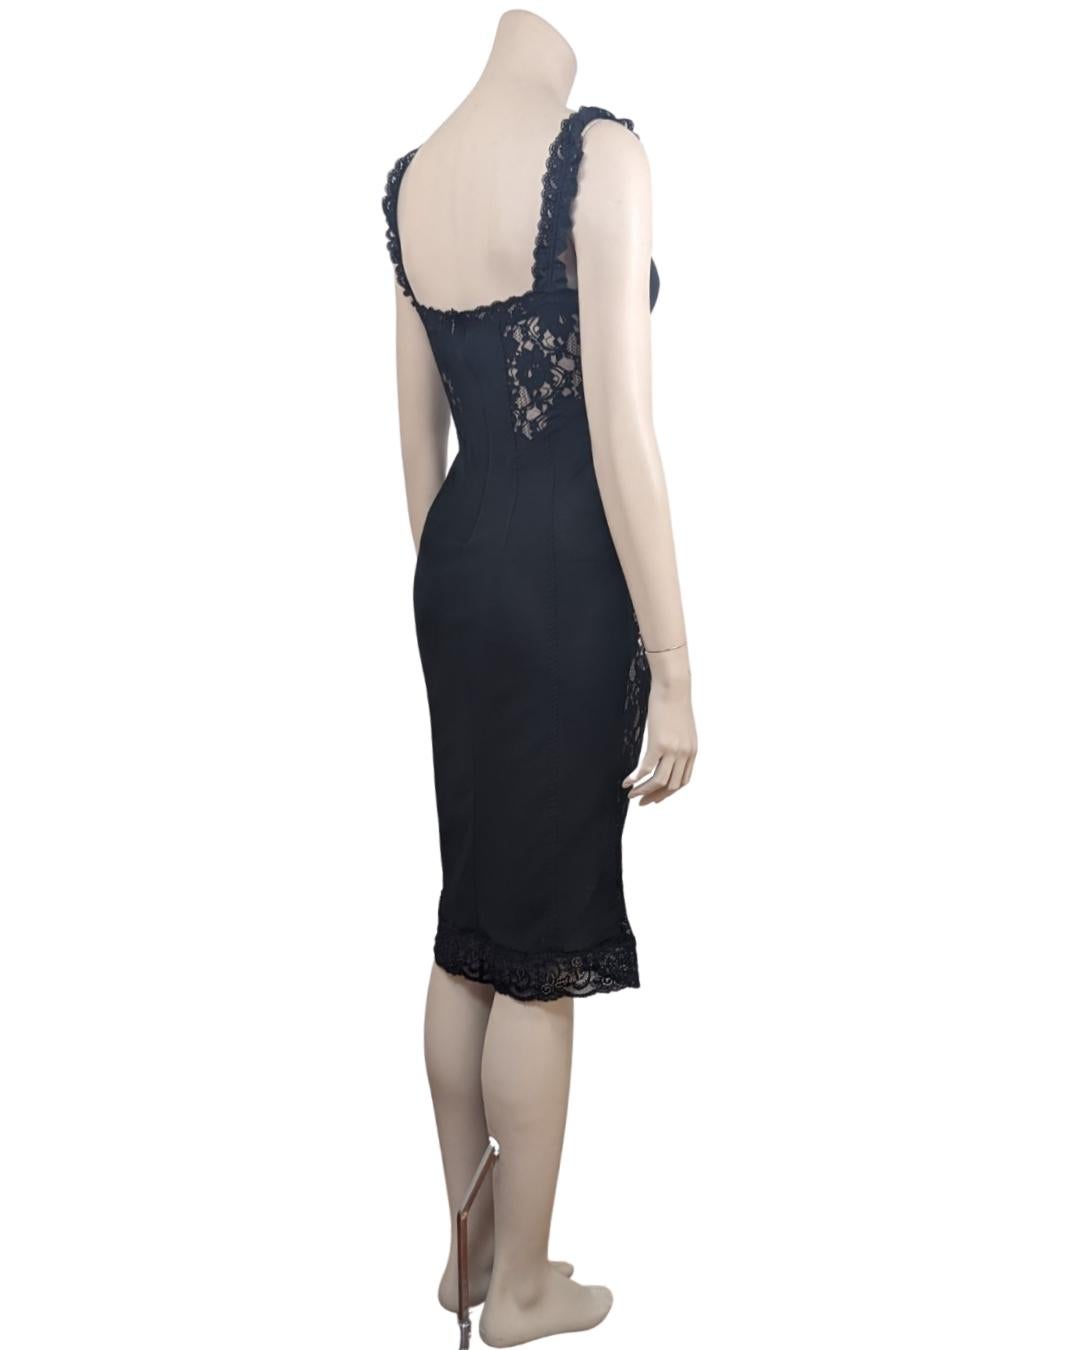 D&G by Dolce & Gabbana Fall Winter 2003 Laces Insert Midi Dress For Sale 2